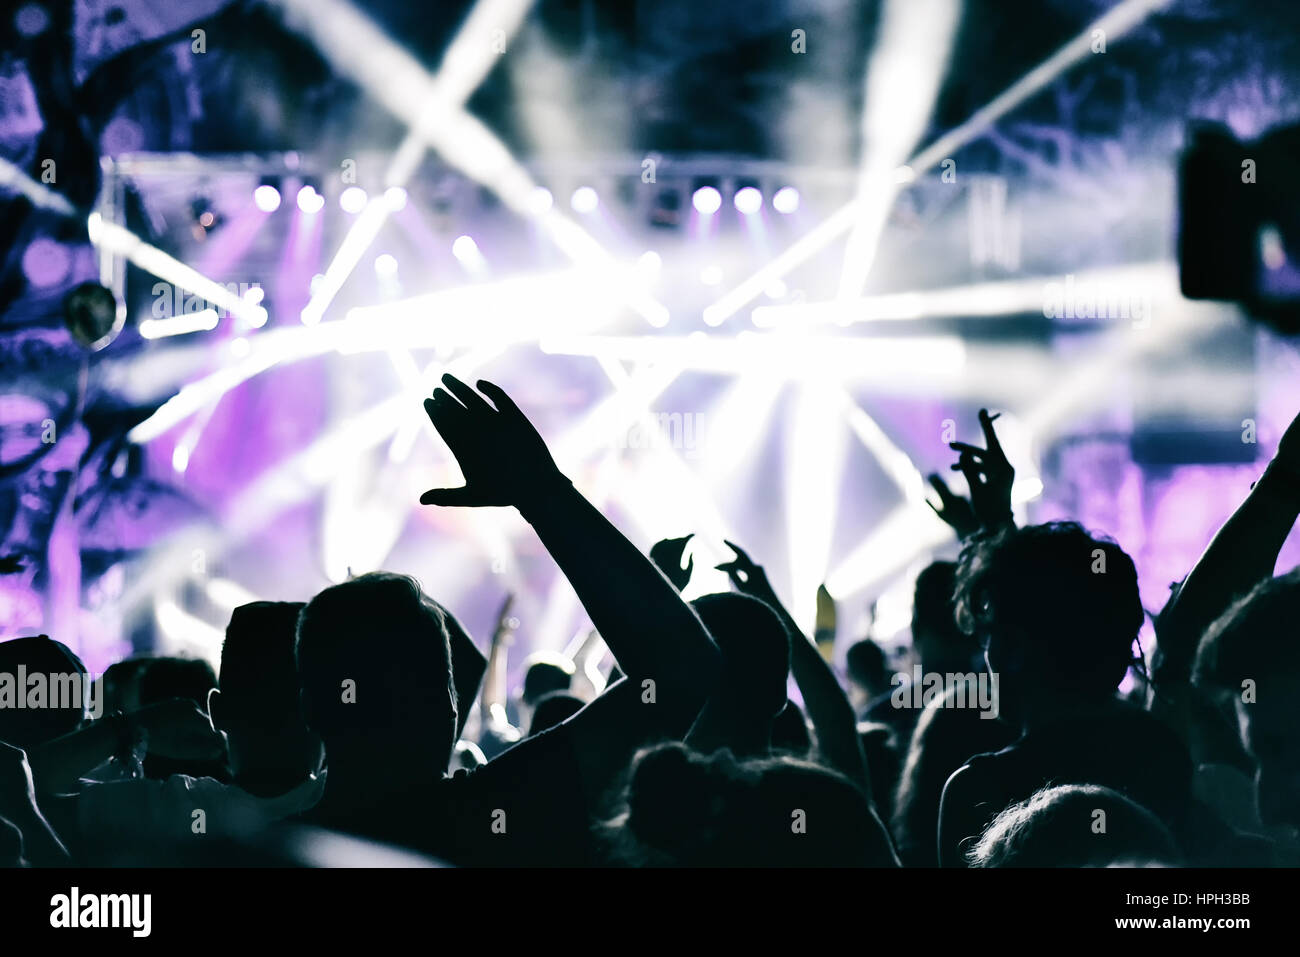 Concert crowd applauding at a music festival Stock Photo - Alamy